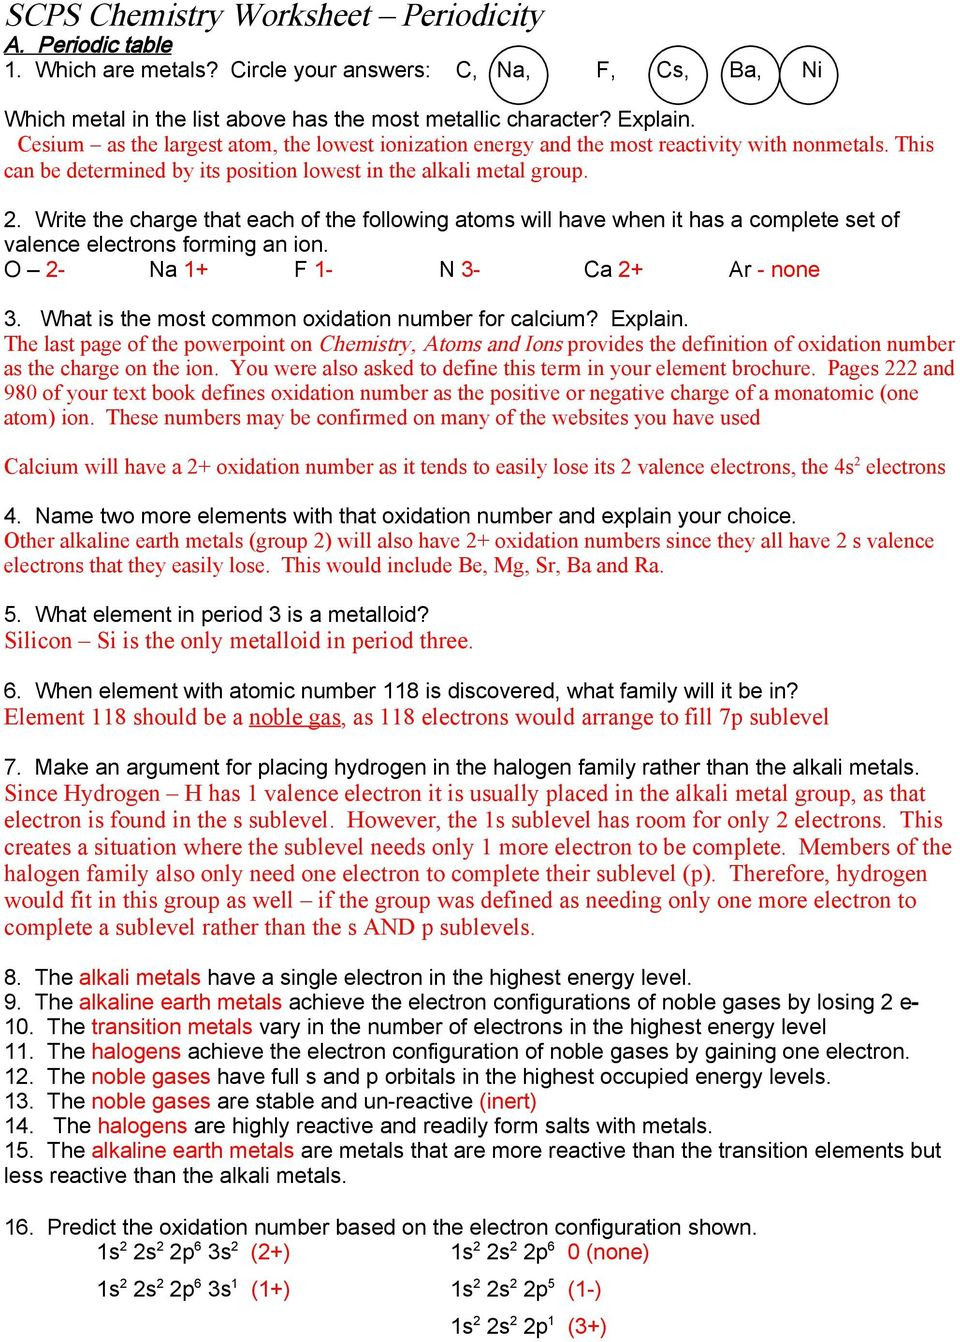 Worksheet Periodic Trends Answers Scps Chemistry Worksheet Periodicity A Periodic Table 1